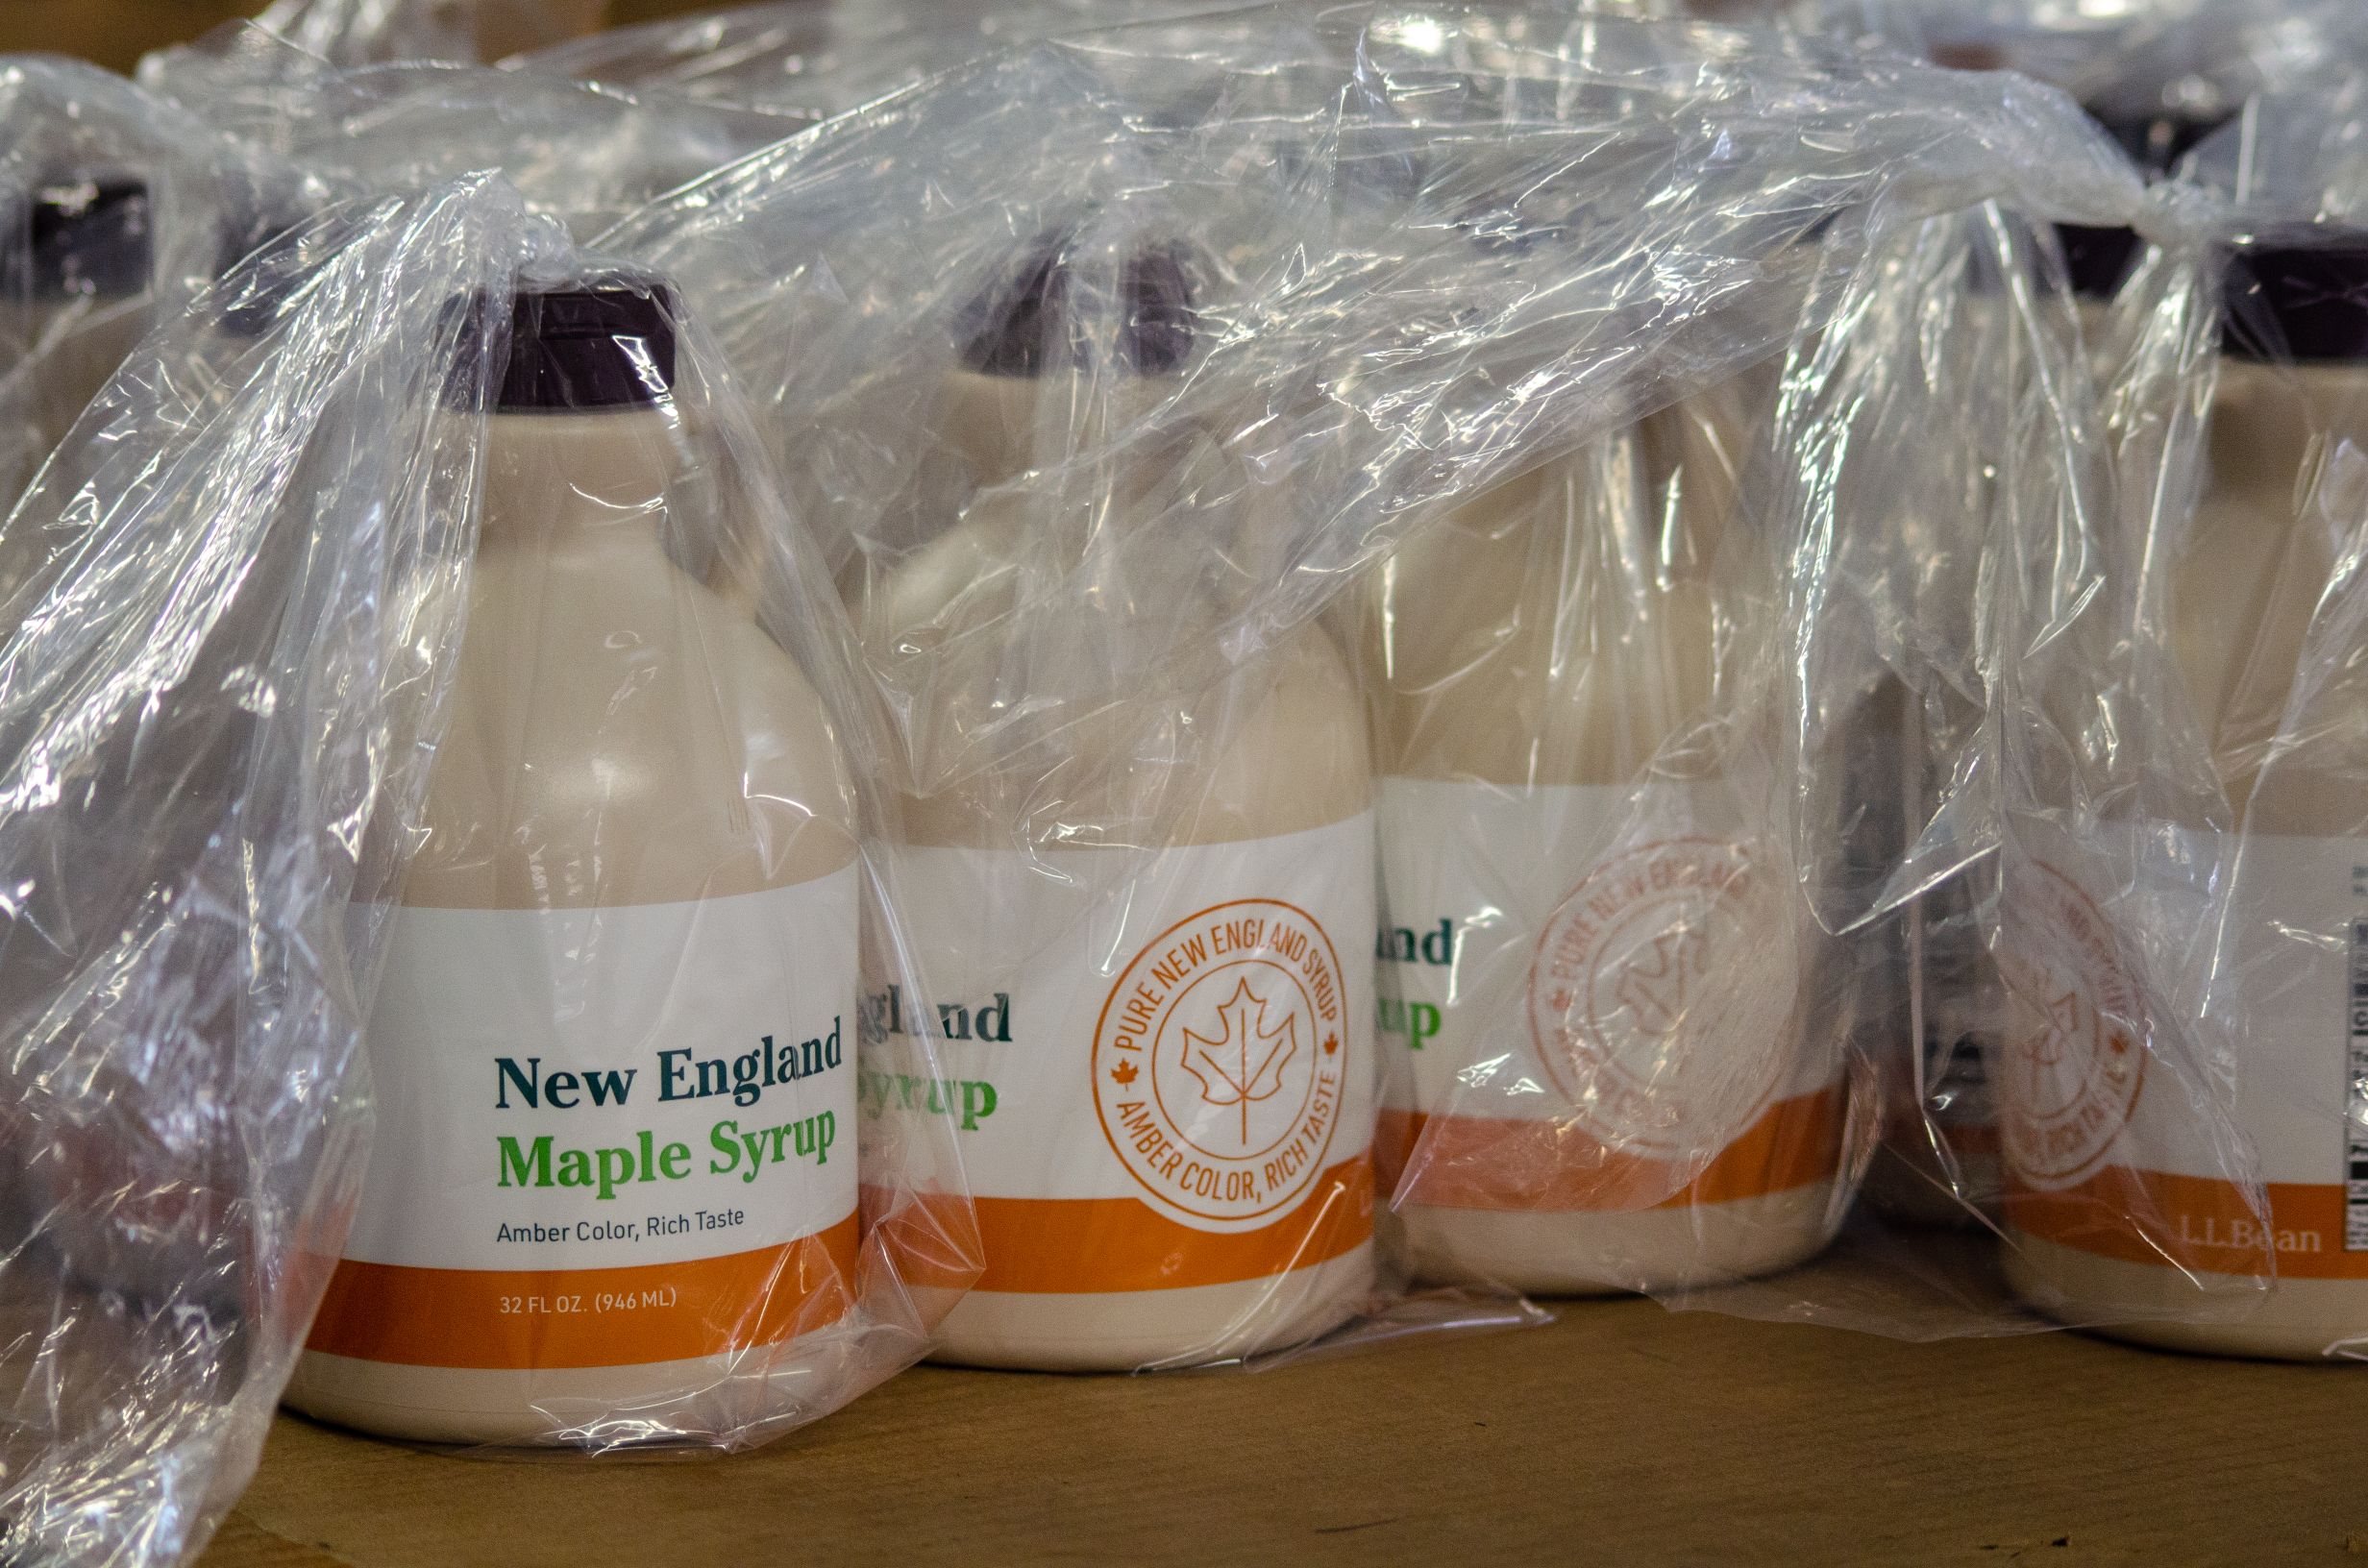 New England Maple Syrup being packaged